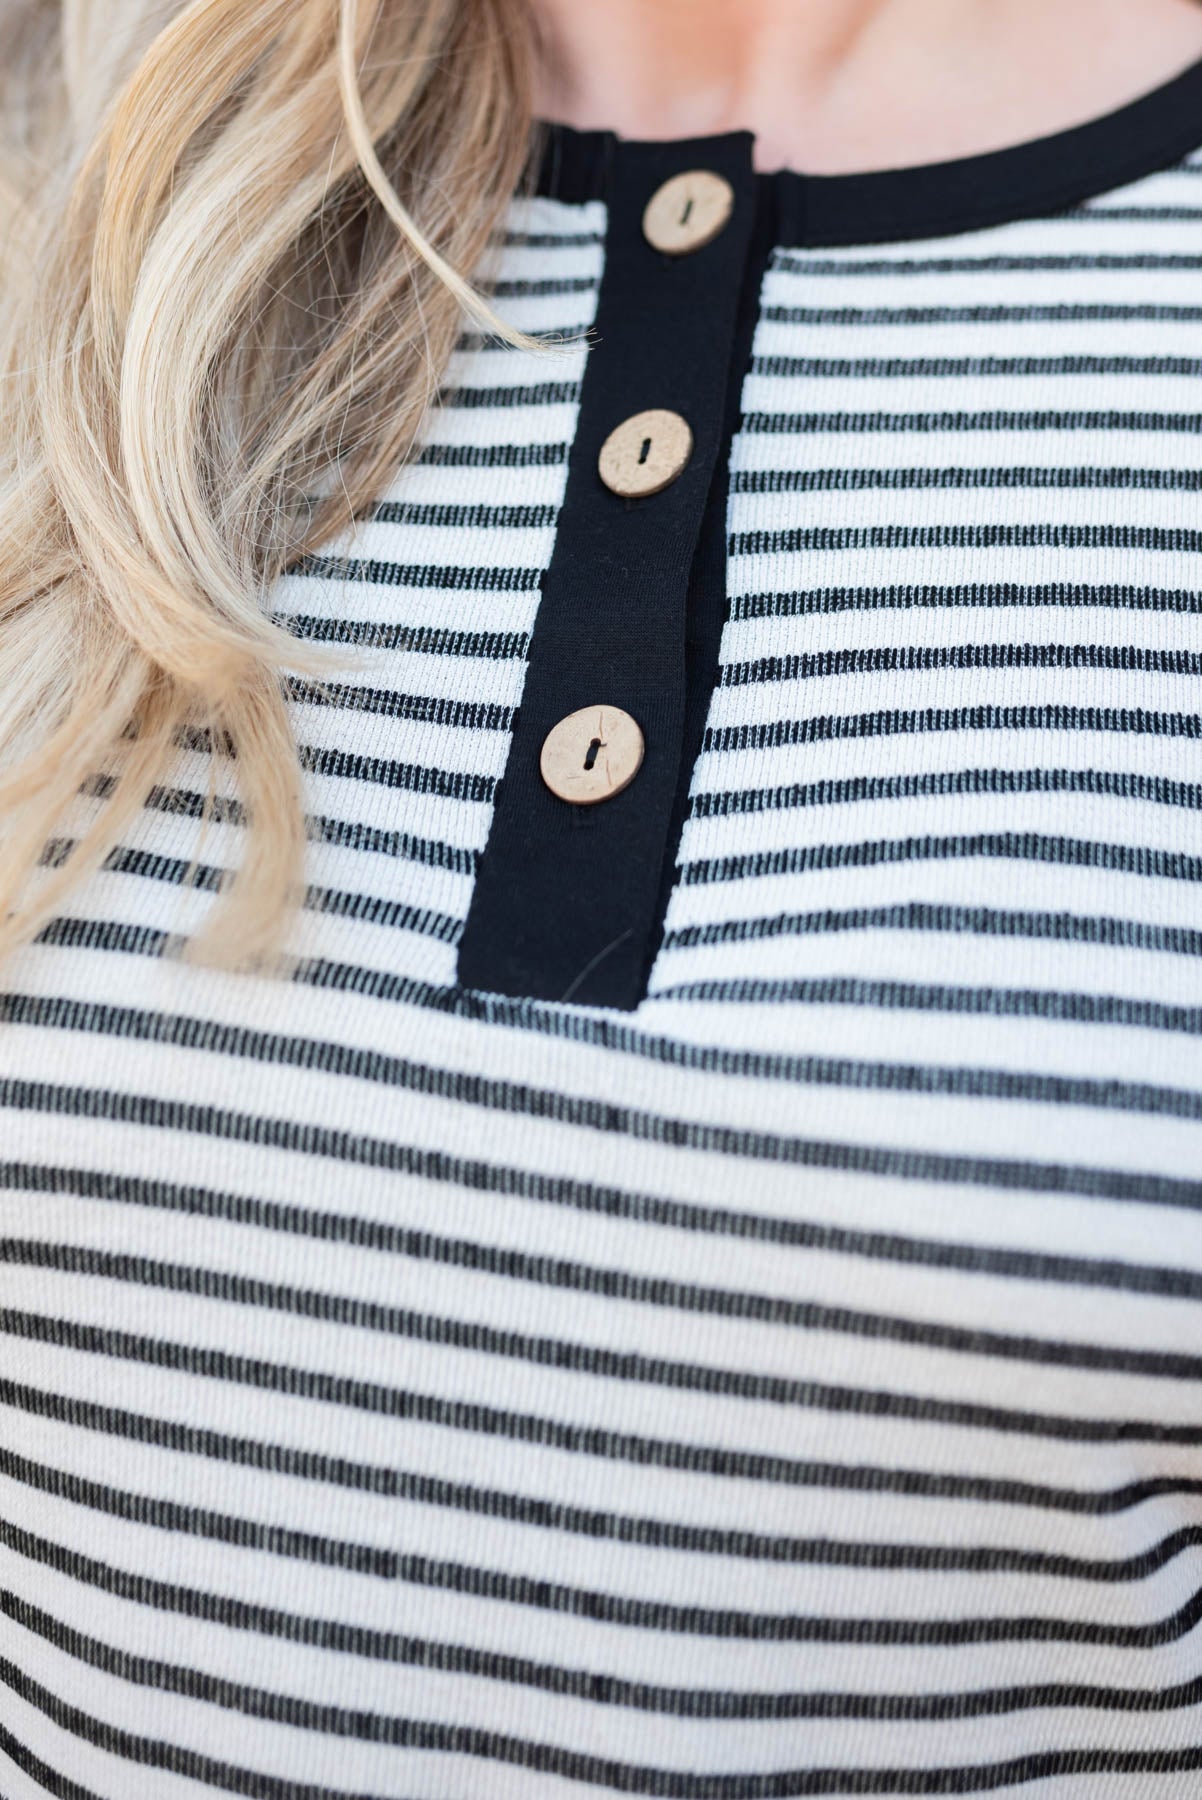 Close up of the buttons on a plus size black top